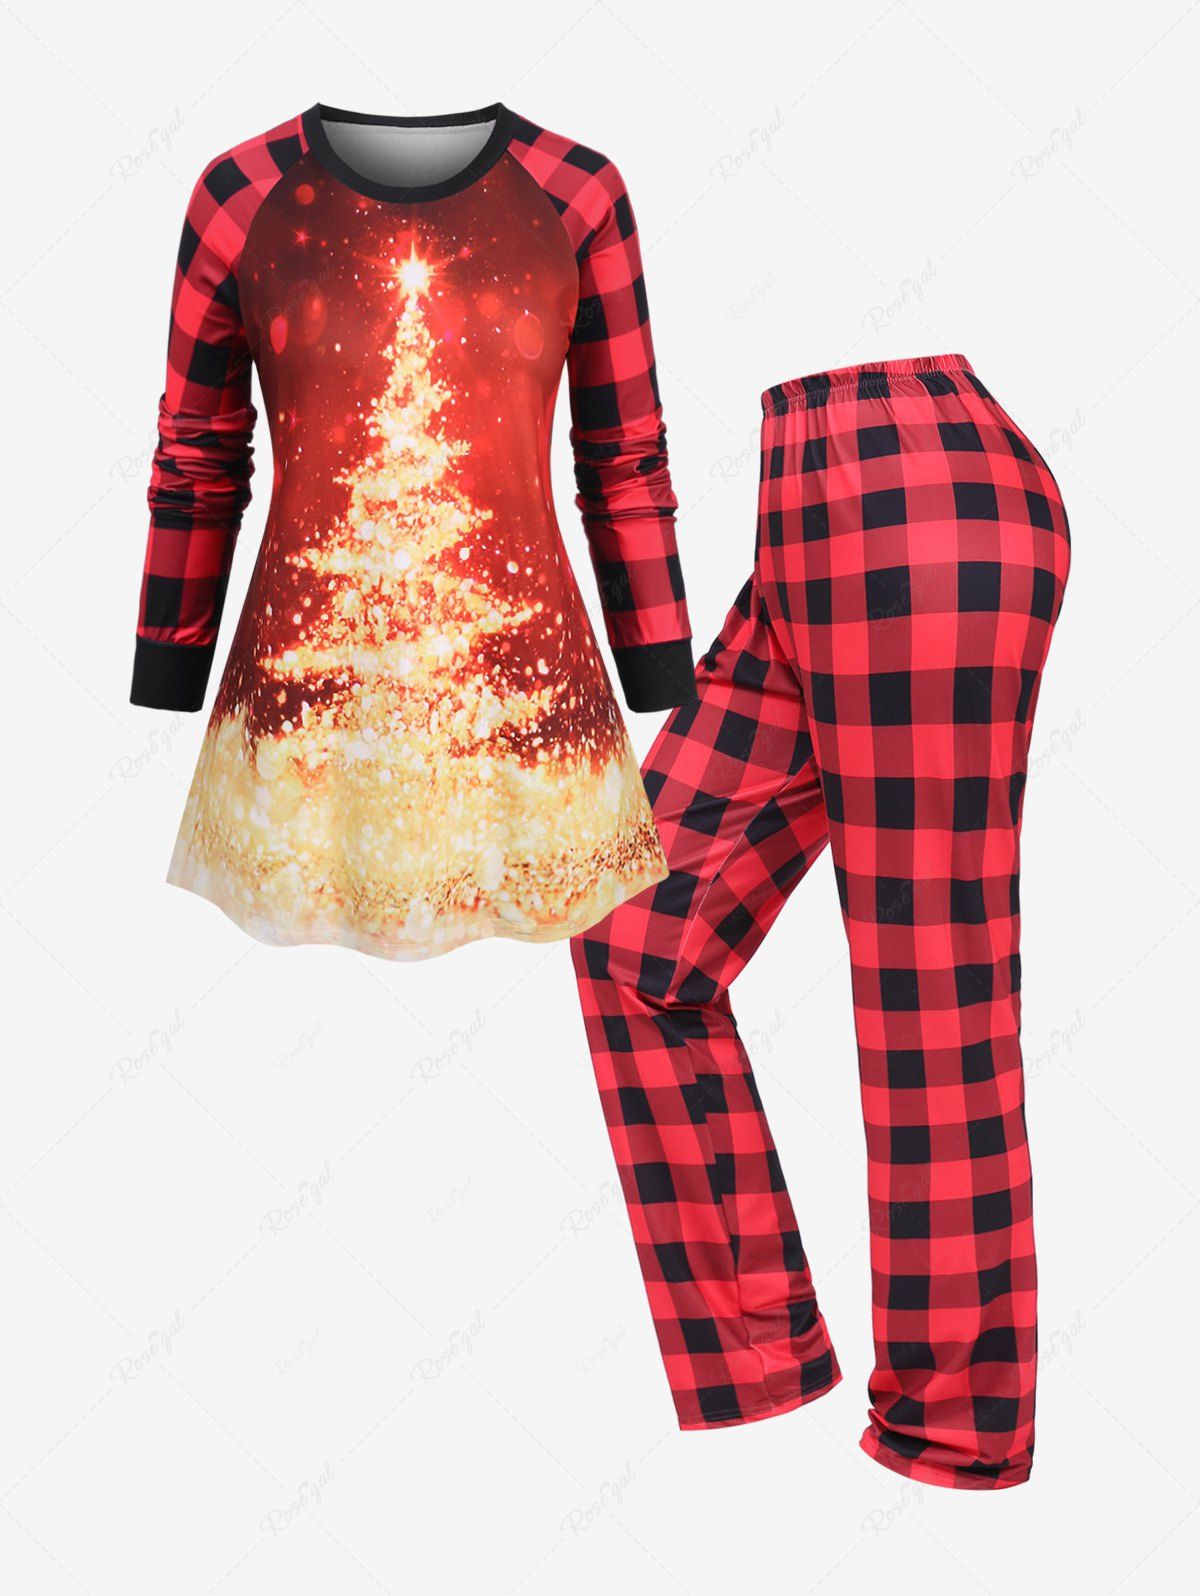 Outfit Plus Size Christmas Tree Glitter Sequin 3D Print Top and Plaid Pants Pajama Set  